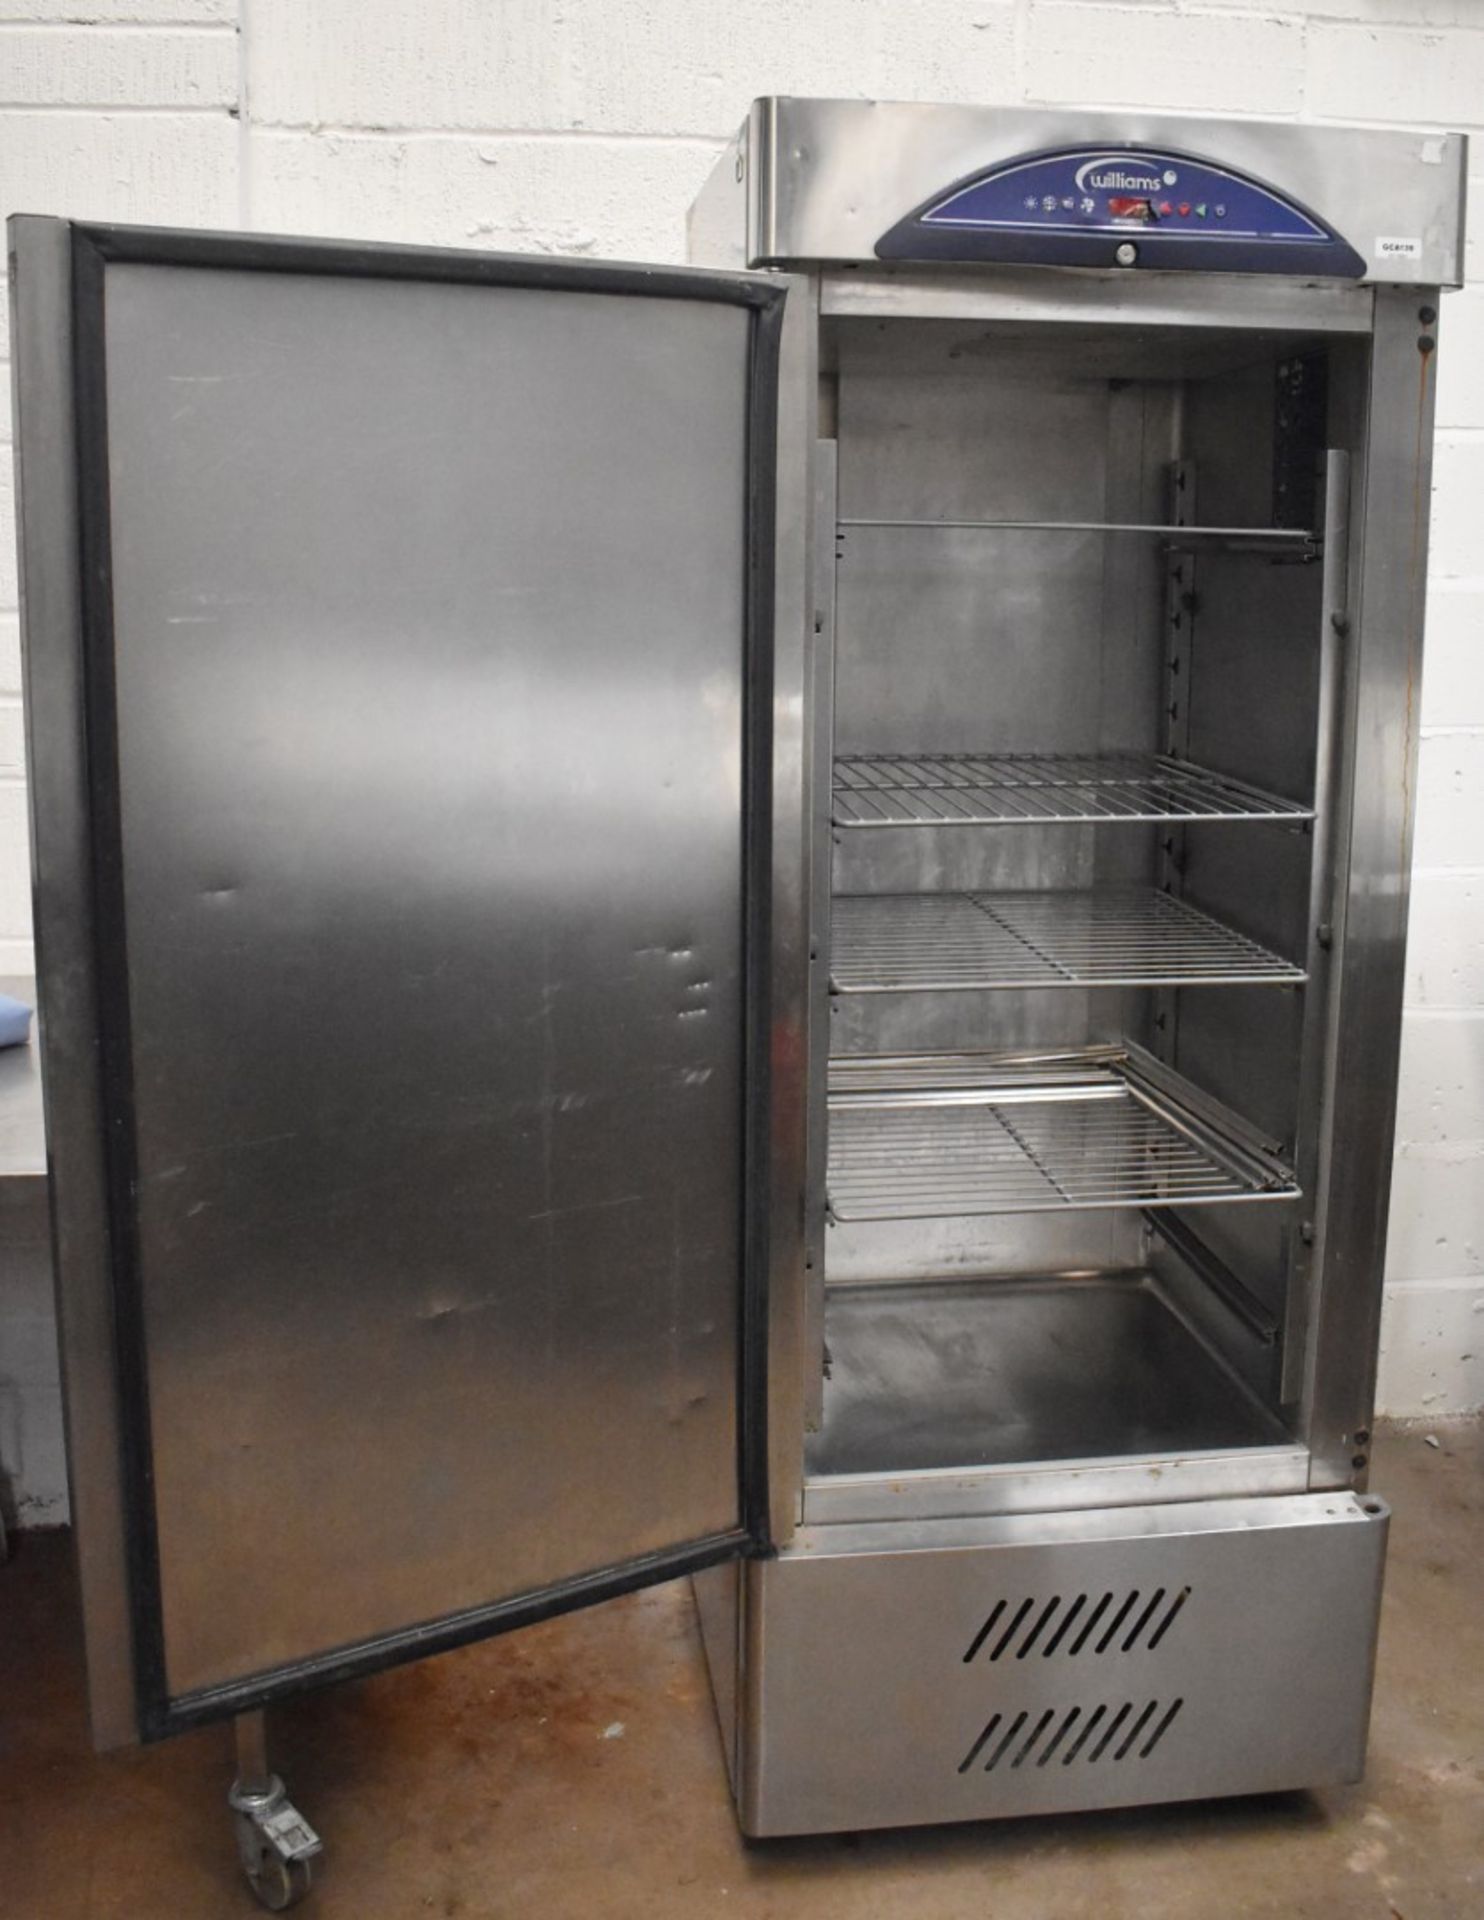 1 x Williams HZ16 Upright Single Door Refrigerator With Stainless Steel Finish - Ref: GCA139 WH5 - - Image 4 of 12